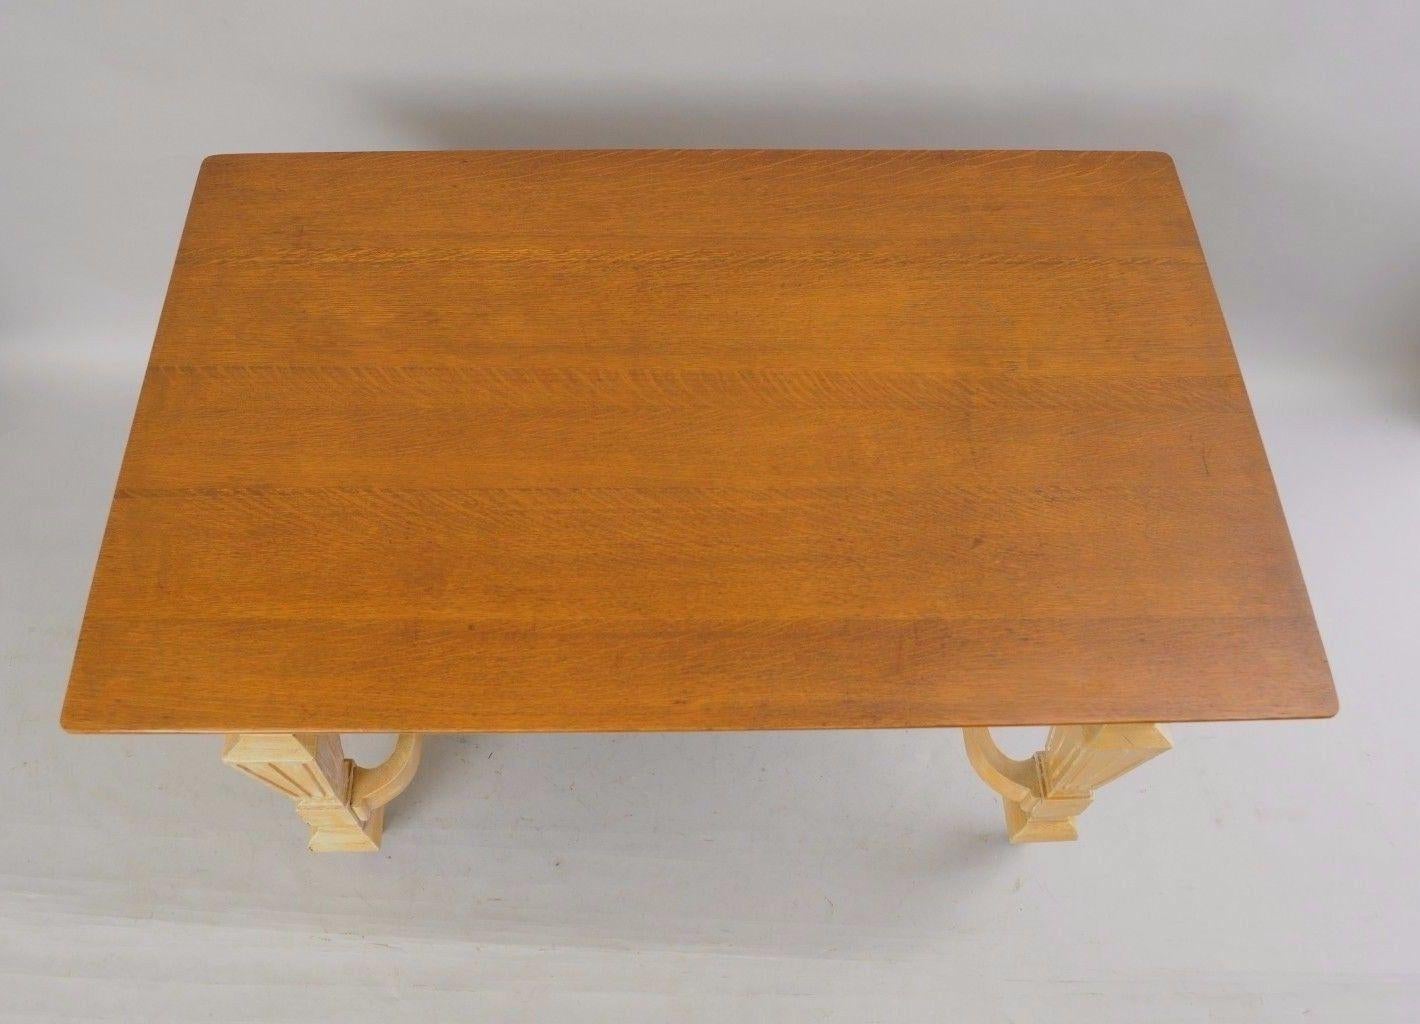 Antique Mission golden oak table with one drawer. Item features solid oakwood construction, single drawer, lower shelf, brass hardware, golden oak top with beautiful wood grain, finished back, solid wood base with attractive yellow 